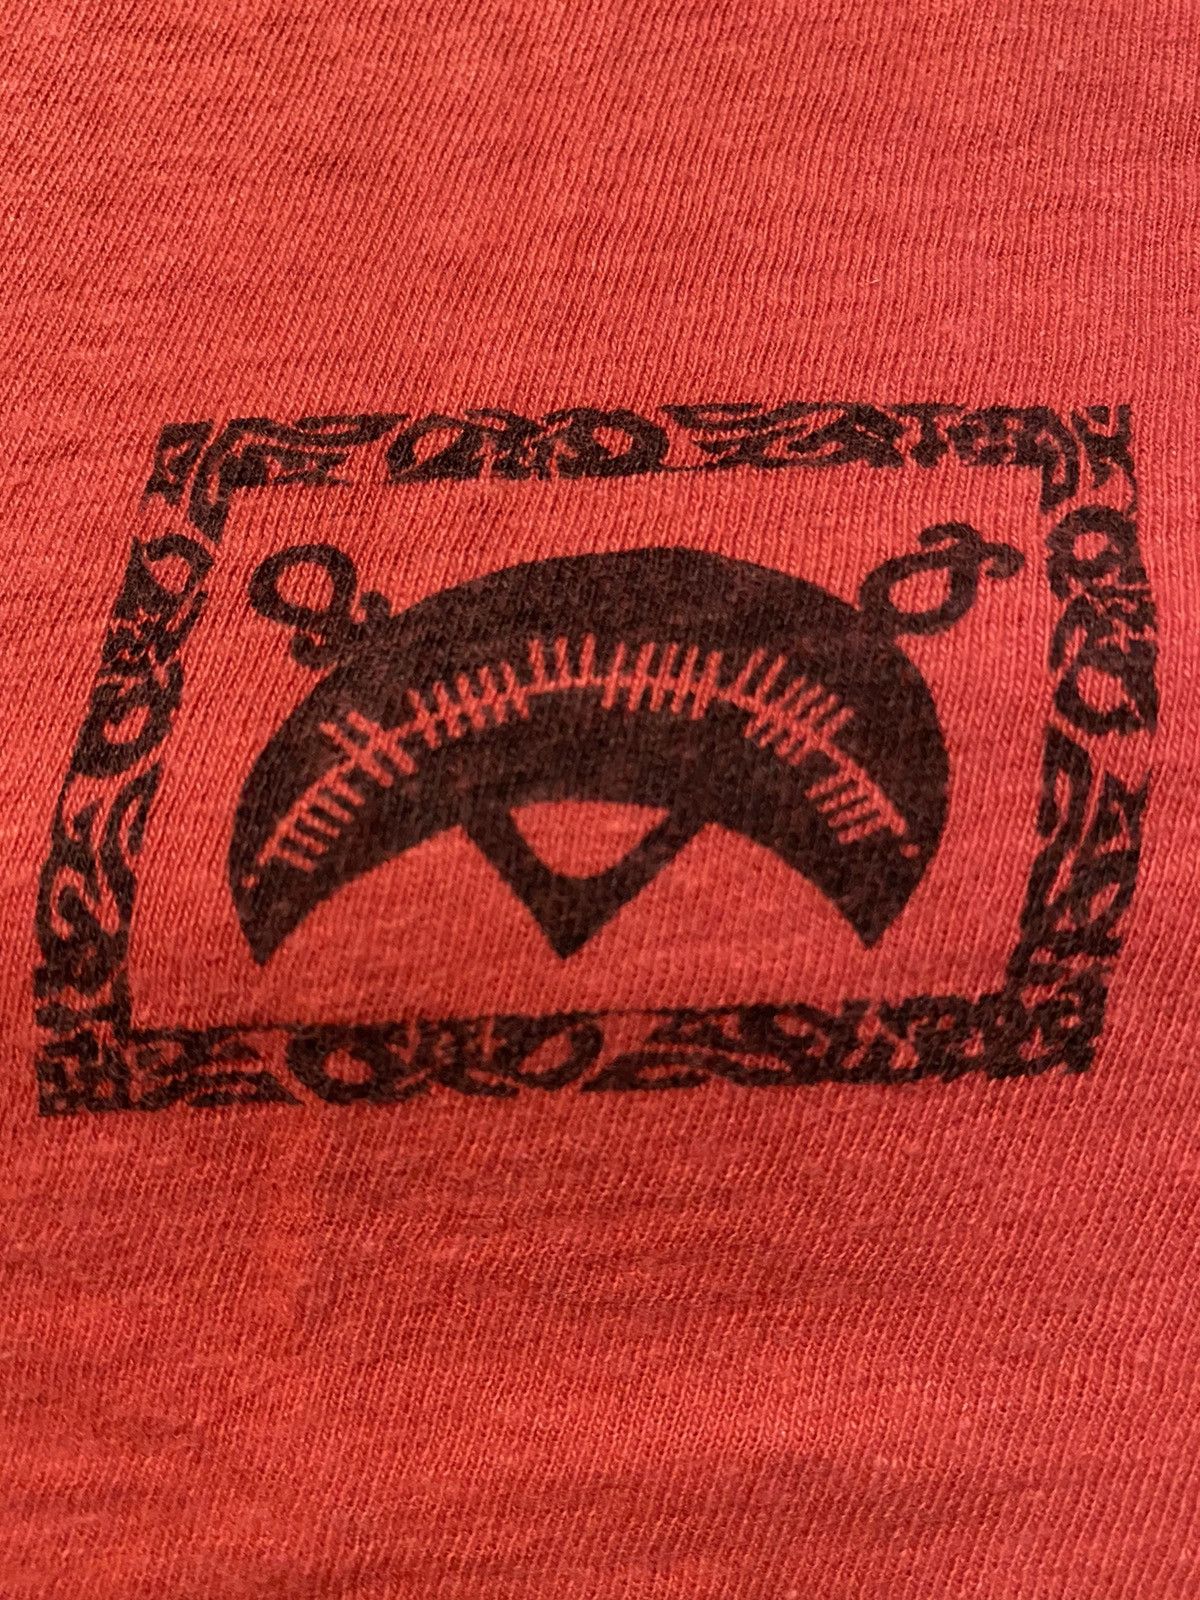 Undercover Undercover Scab Bear Red T-shirt Size US L / EU 52-54 / 3 - 9 Preview